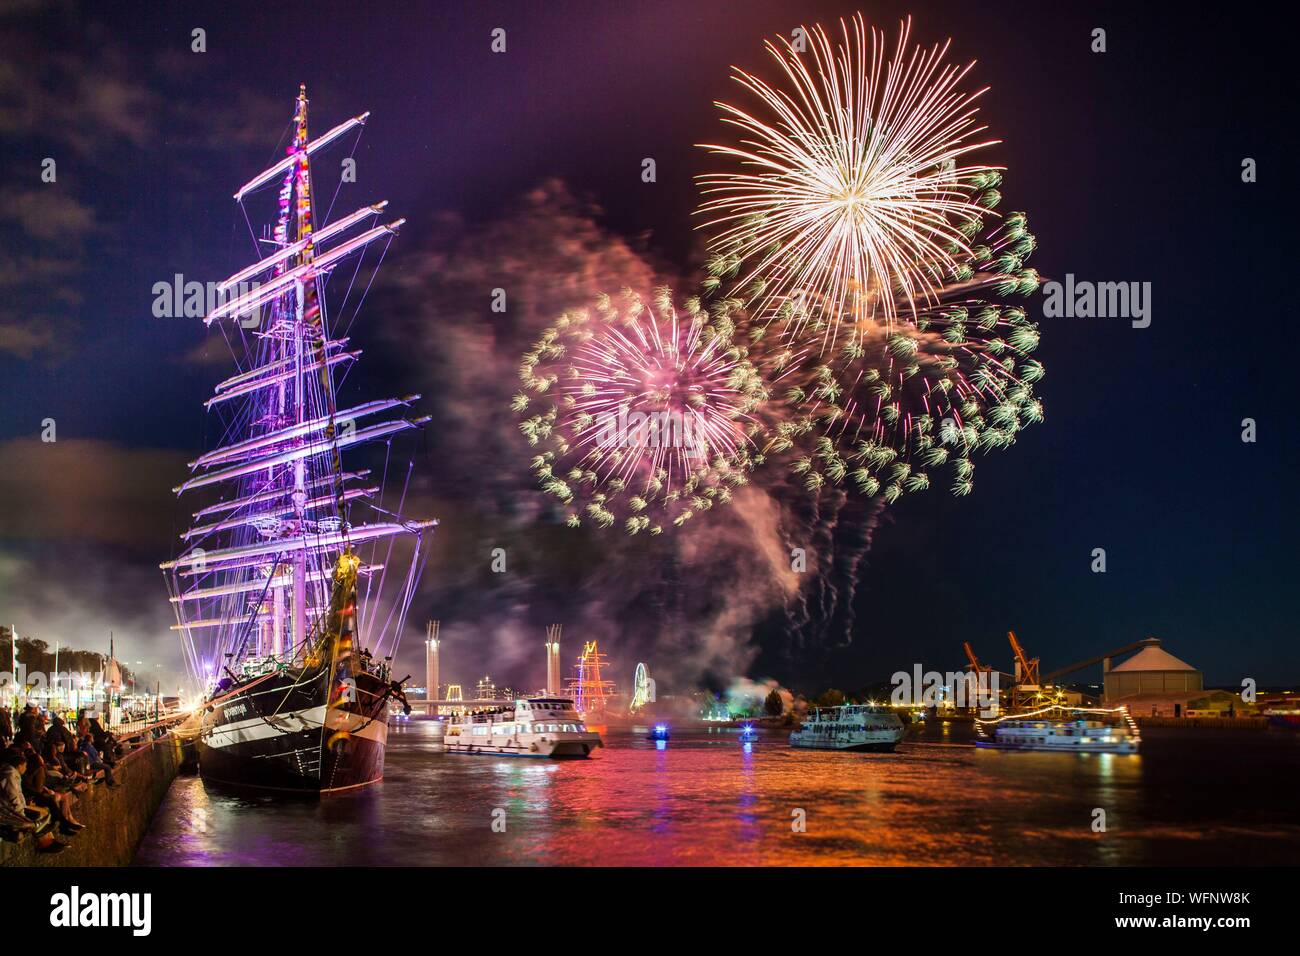 France, Seine Maritime, Rouen, Armada 2019, fireworks and tall ships reflection on the Seine River Stock Photo